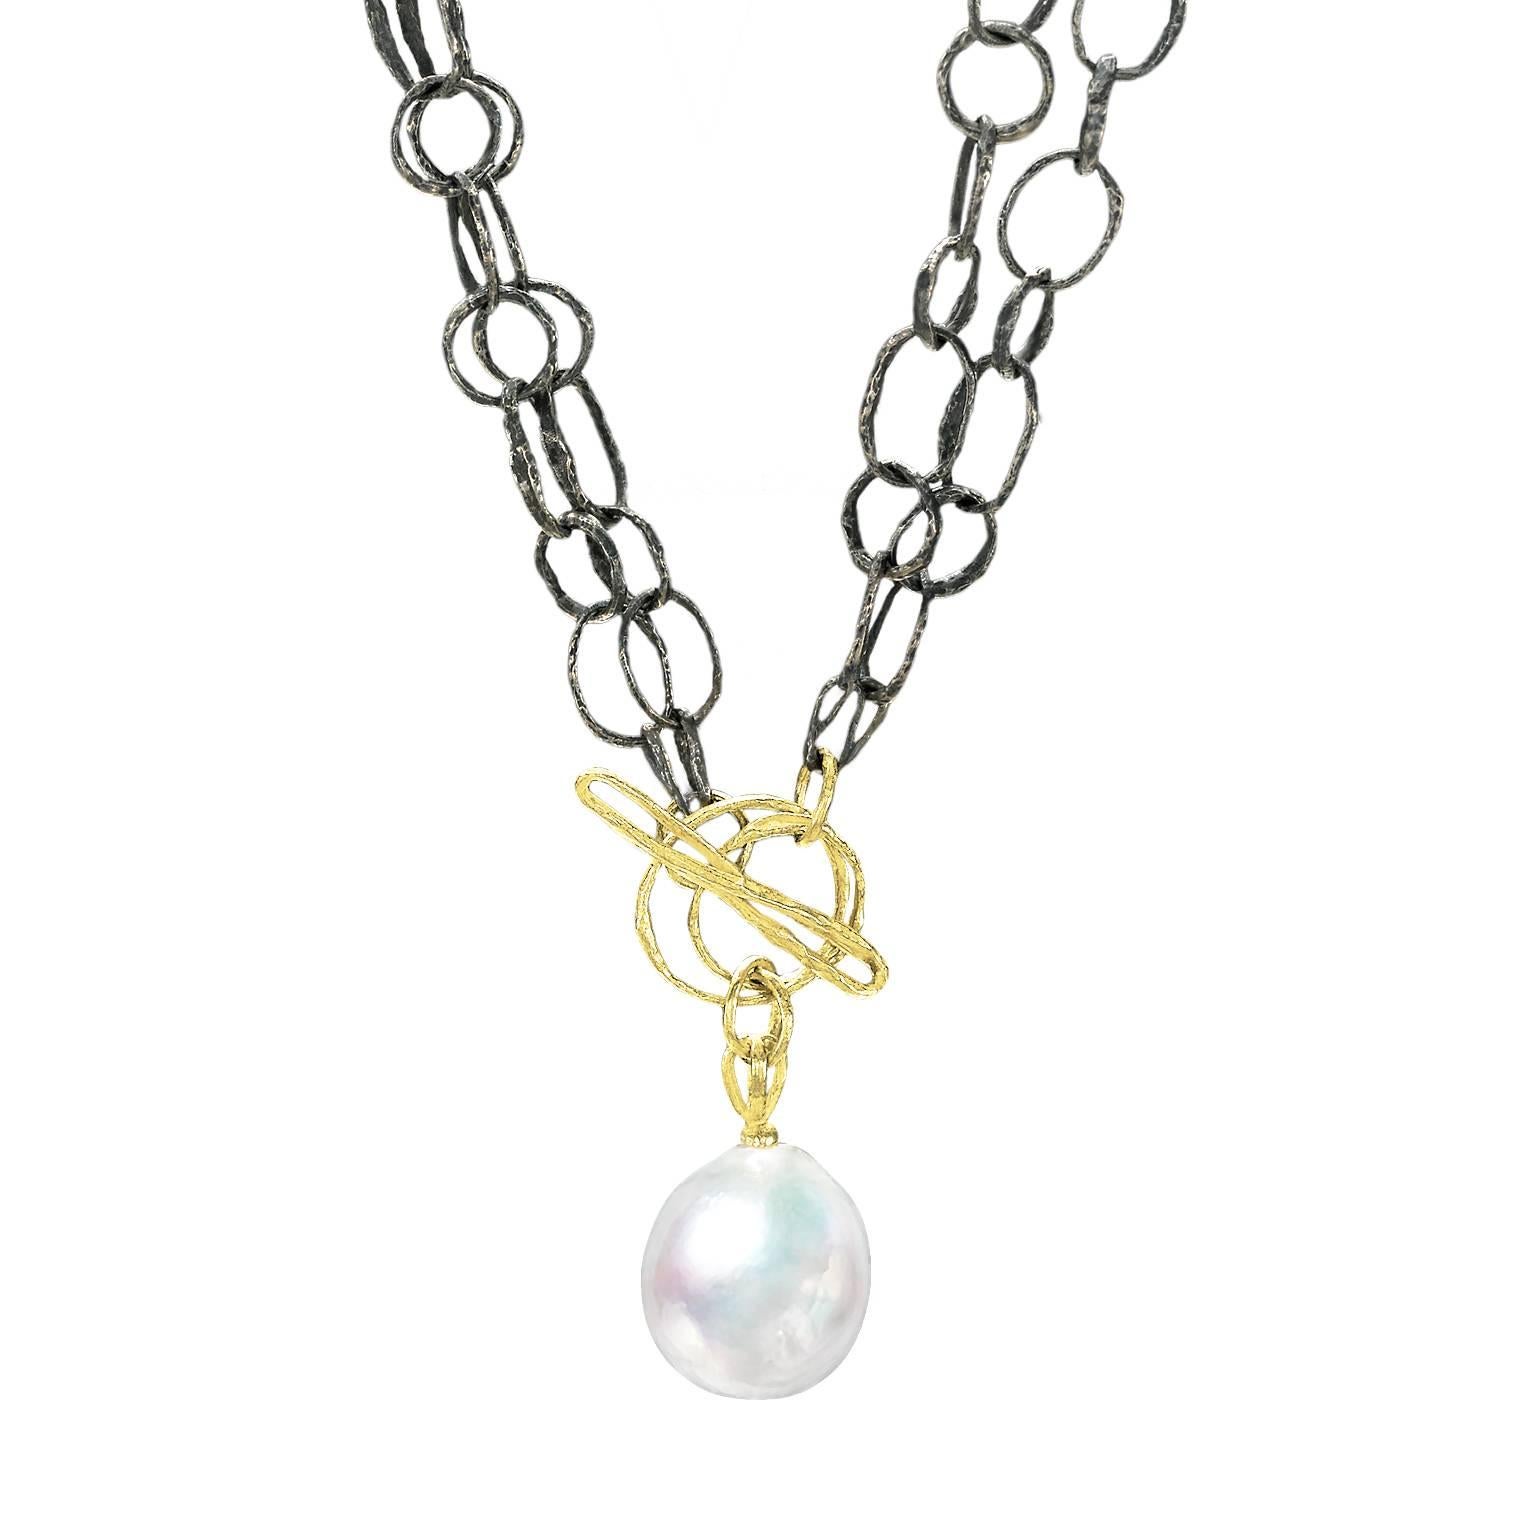 John Iversen South Sea Pearl Double Twig Chain Multi-Length Necklace and Lariat